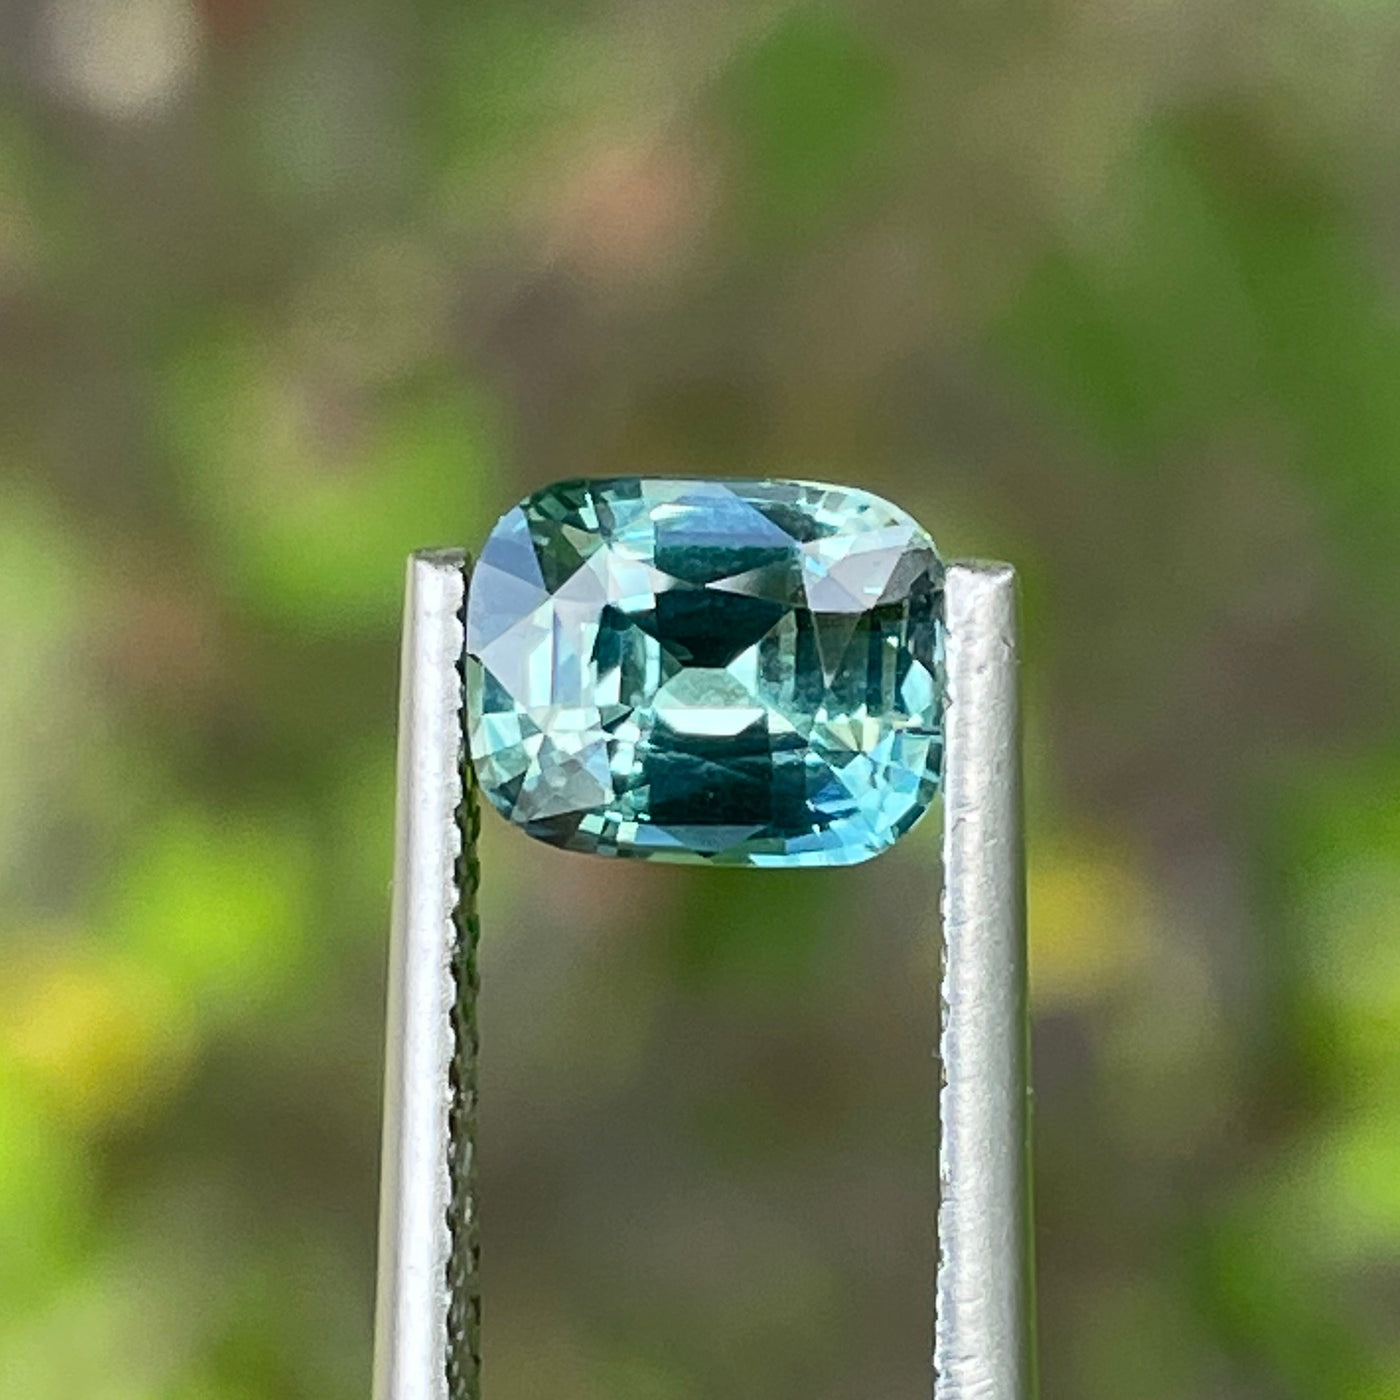 Natural Teal Sapphire Cushion Shapped For Bespoke Engagement Ring